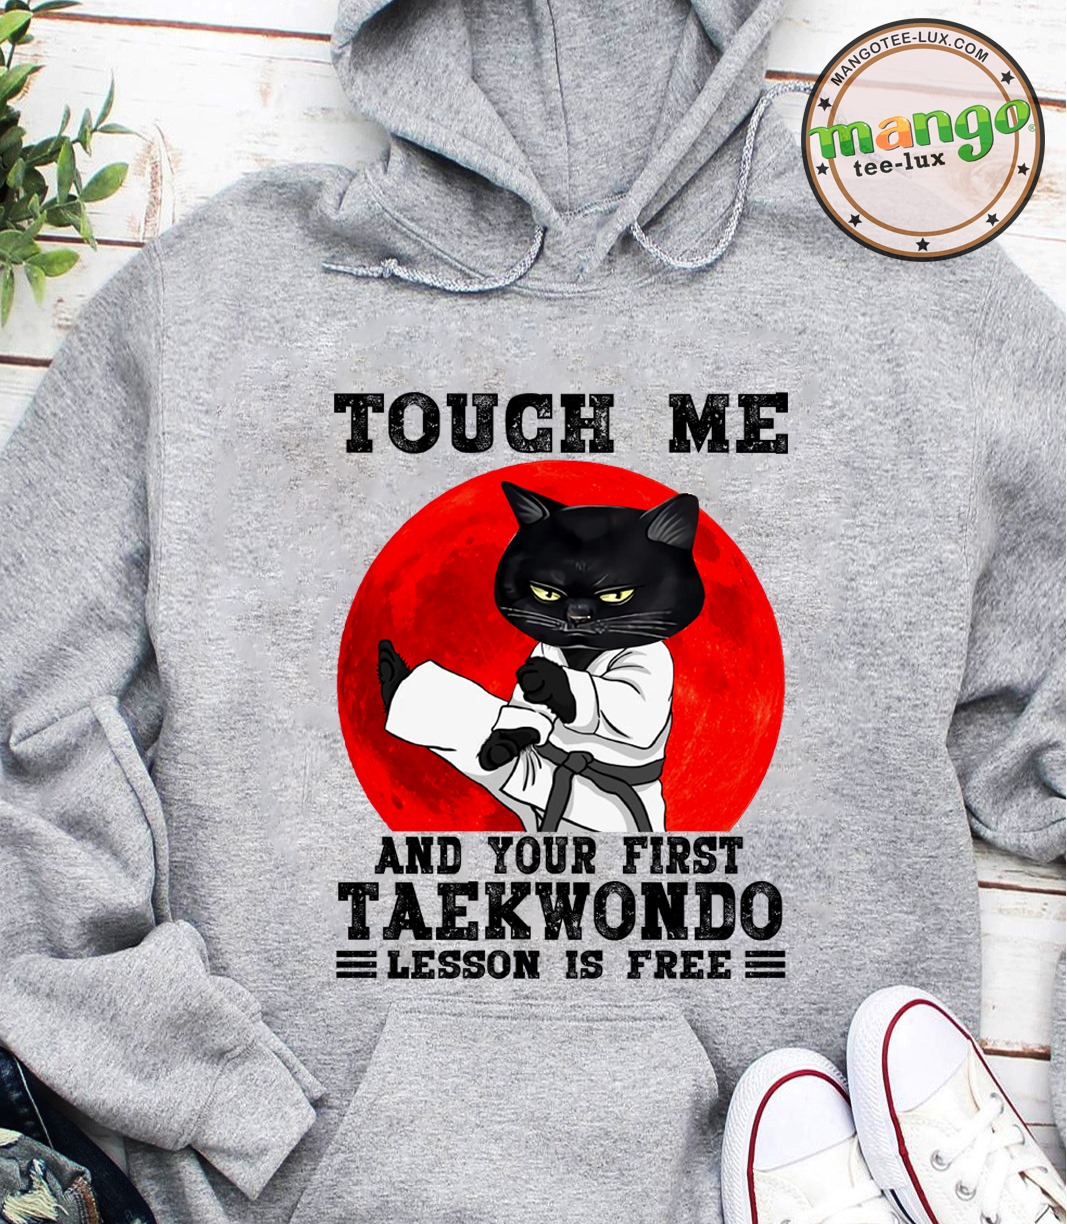 Touch me and your first taekwondo lesson is free